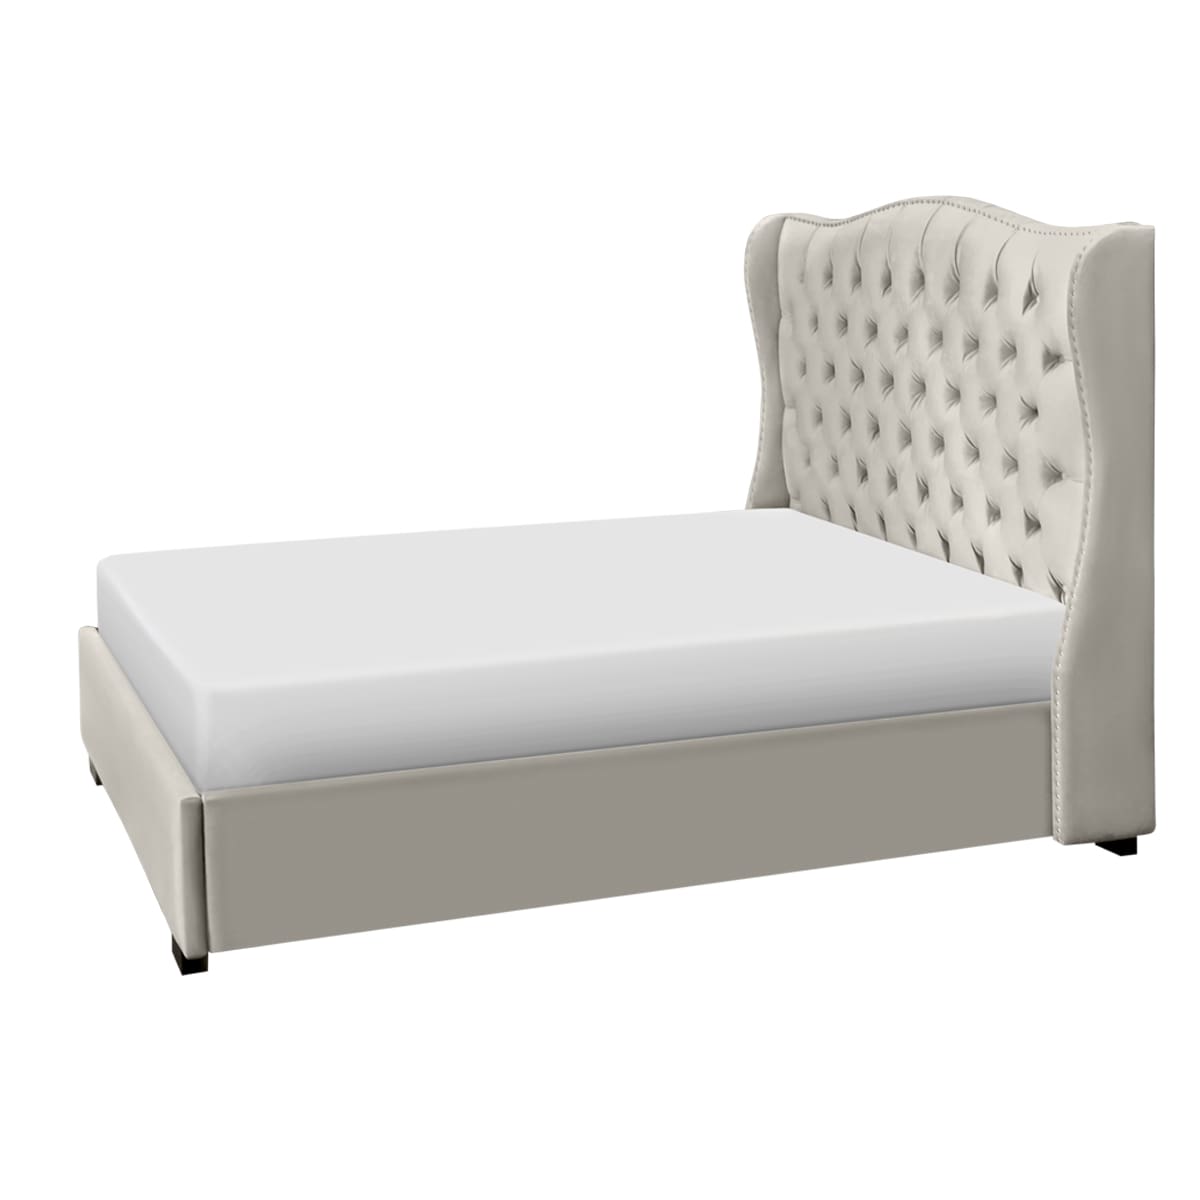 Catalina Upholstery Bed - $1799.99 - BED